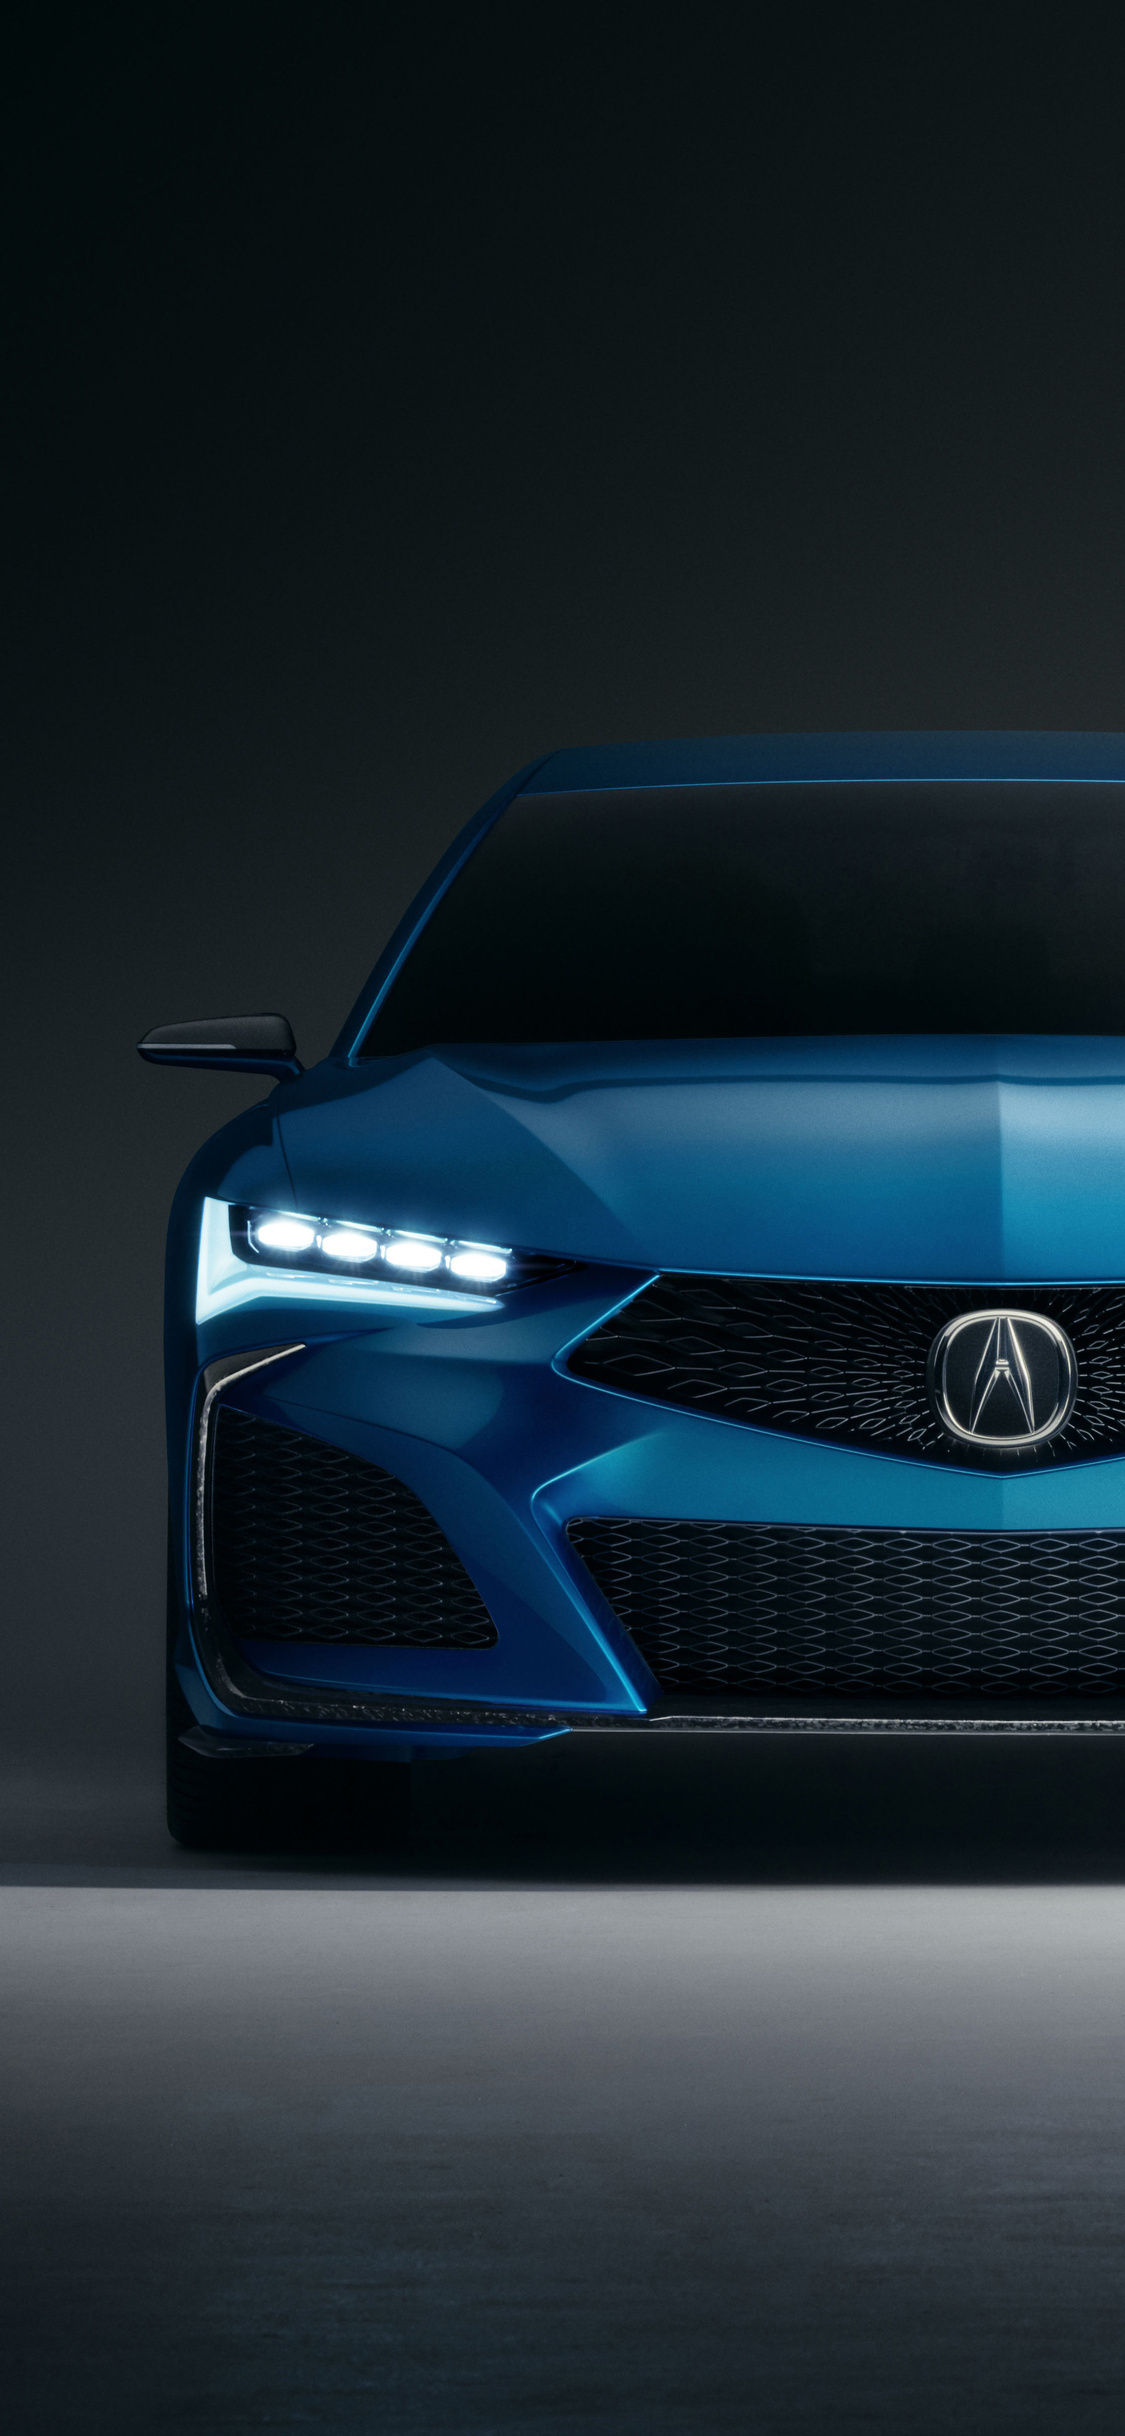 Acura TLX, Concept design, 2019 model, HD wallpapers, 1130x2440 HD Phone